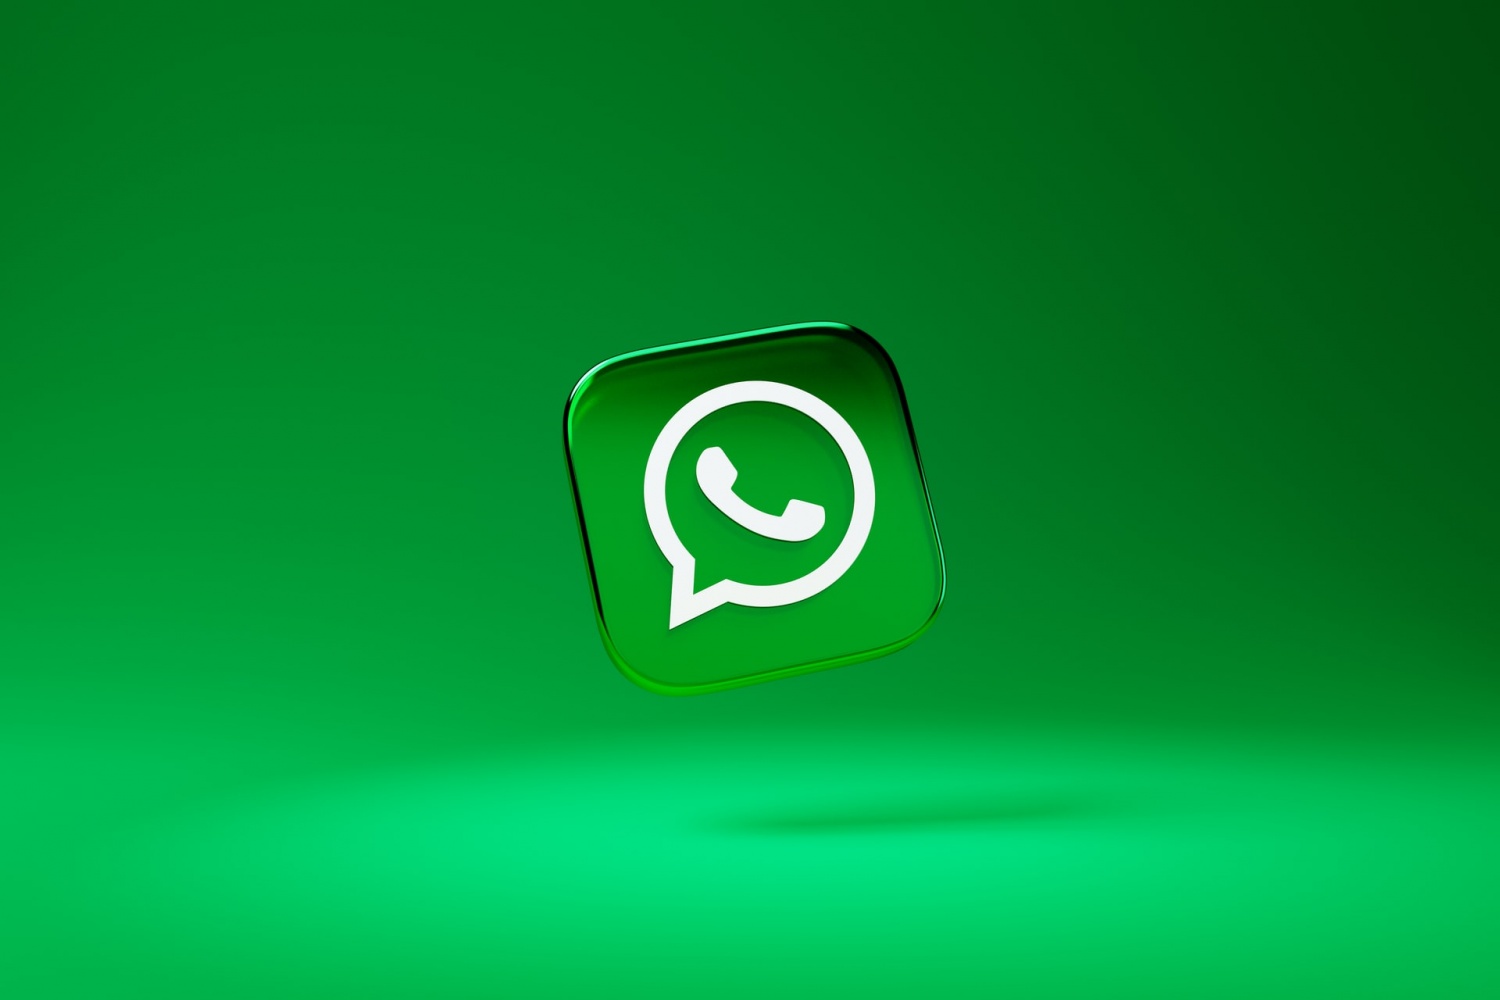 WhatsApp Status Update: Could We Share Voice Message Soon? Early Beta Says it's in the Works Already